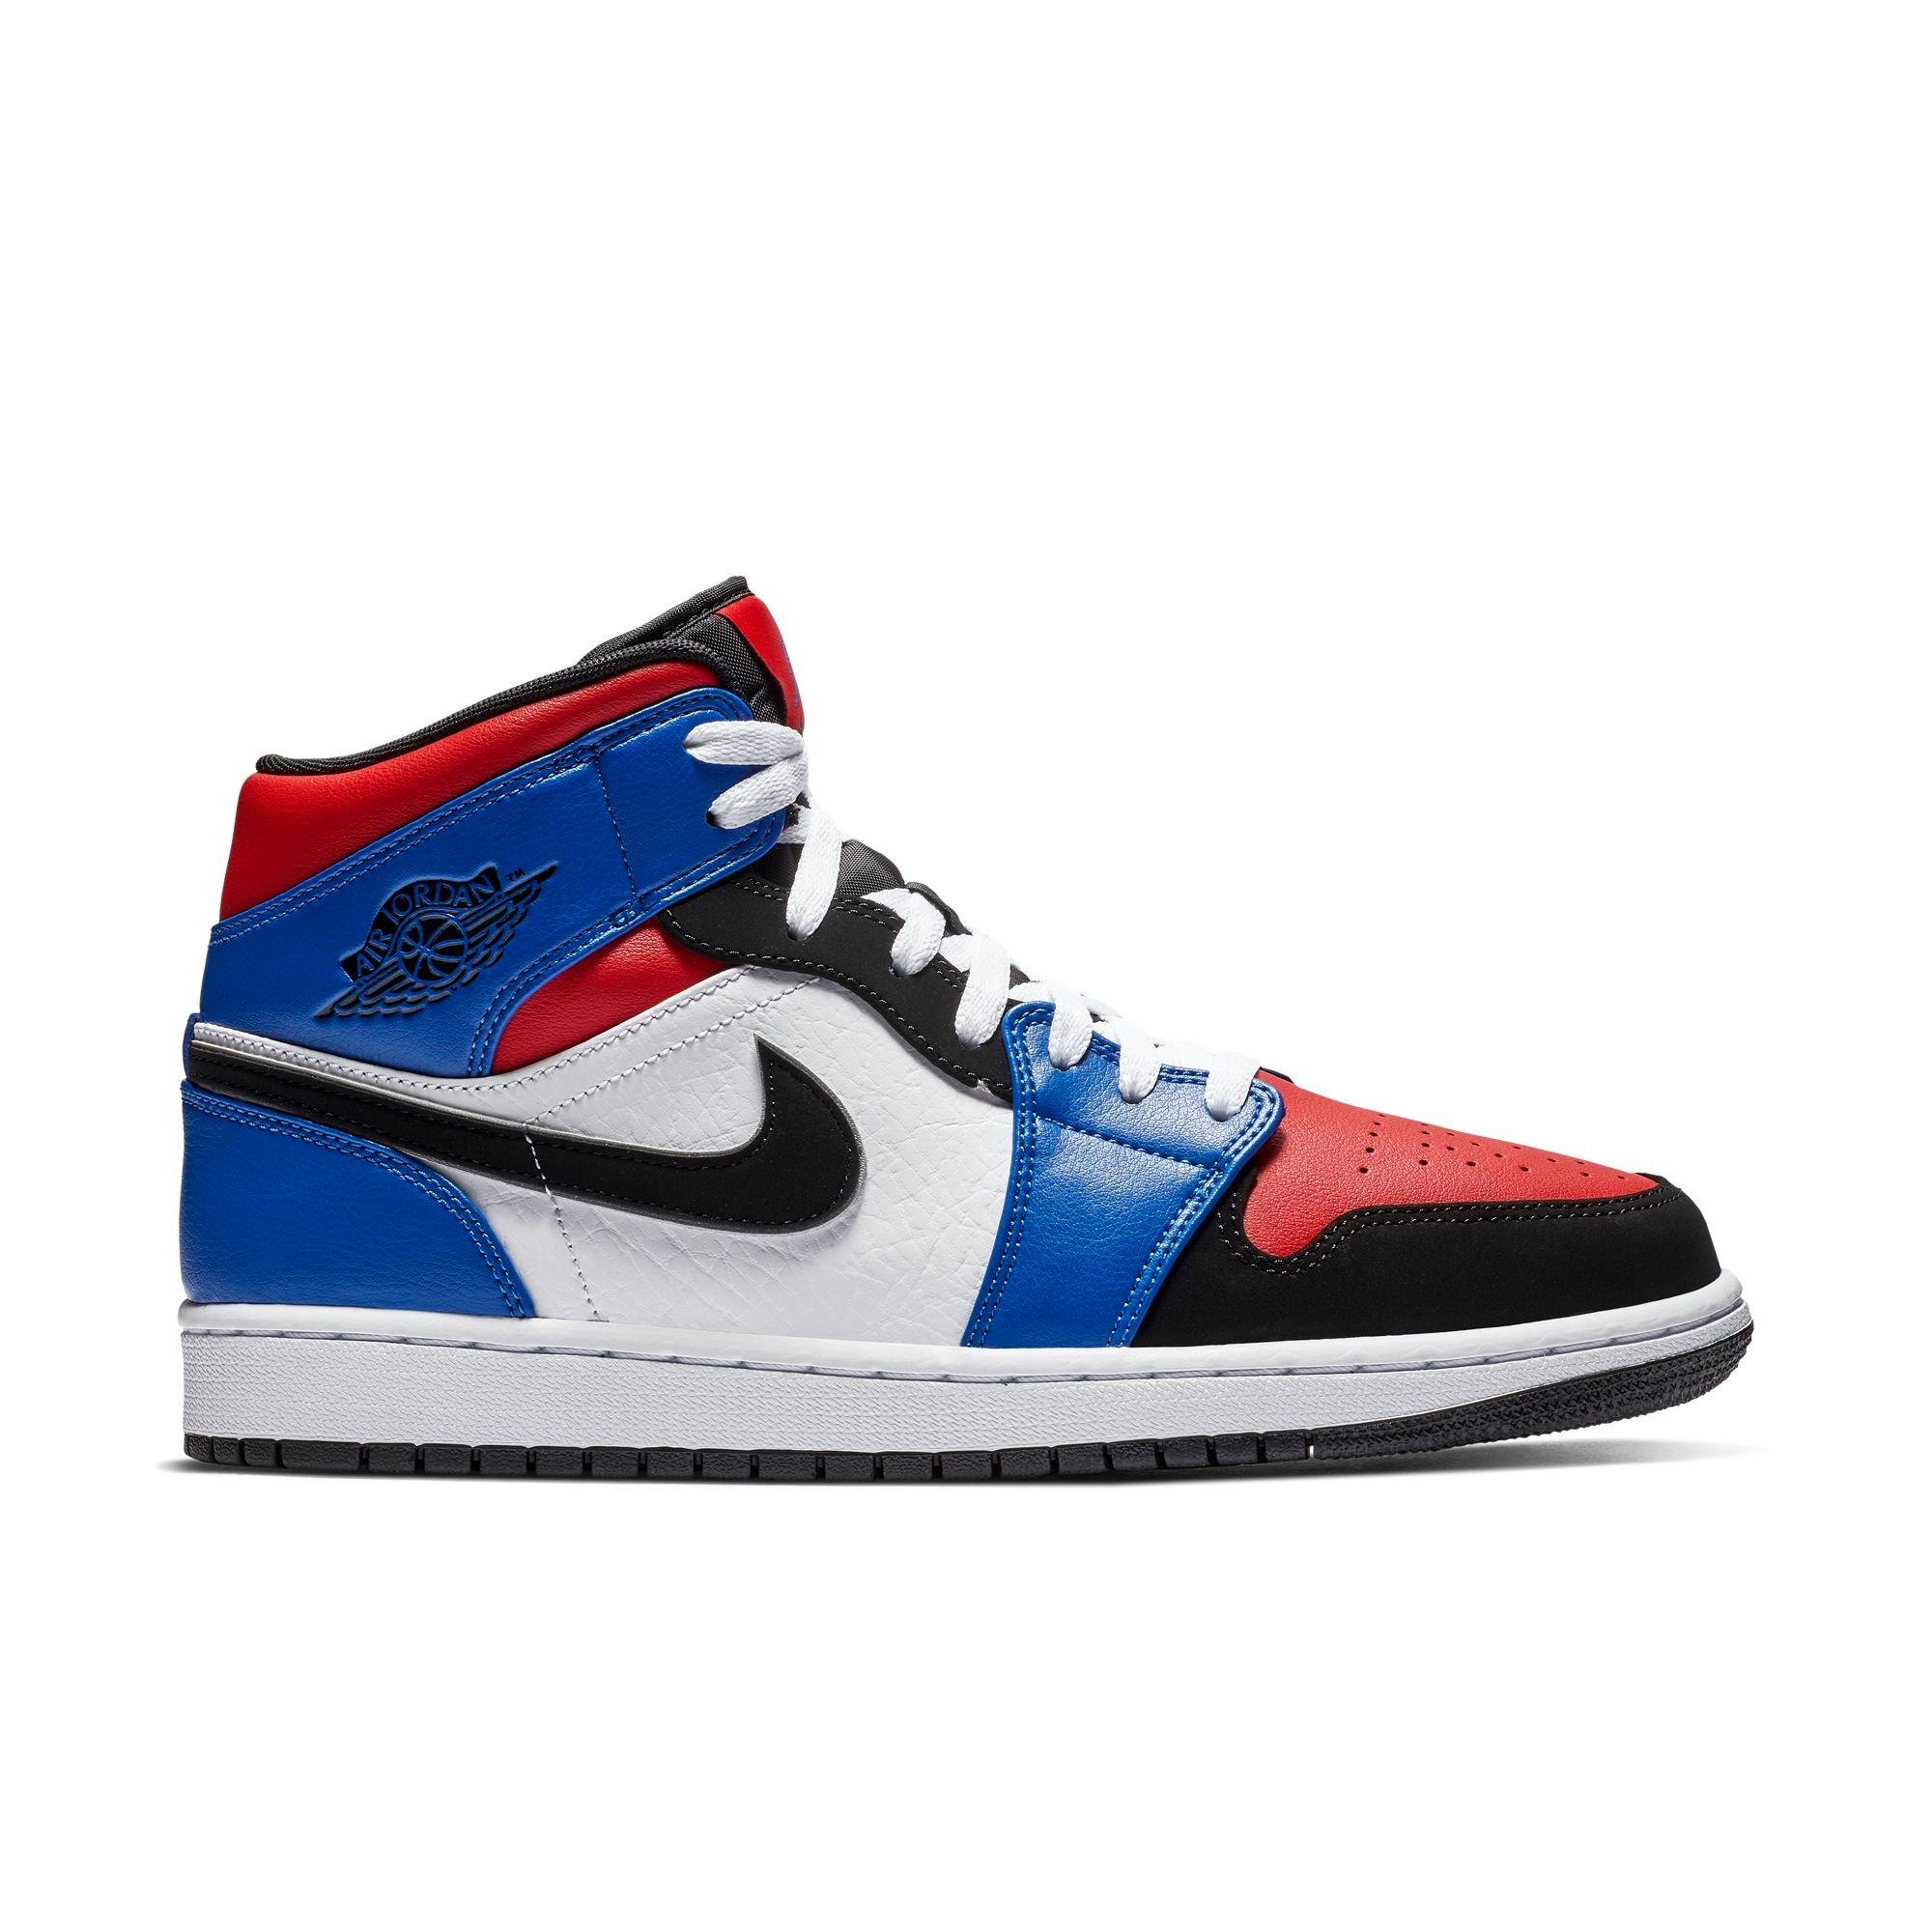 shiny blue and red jordan 1